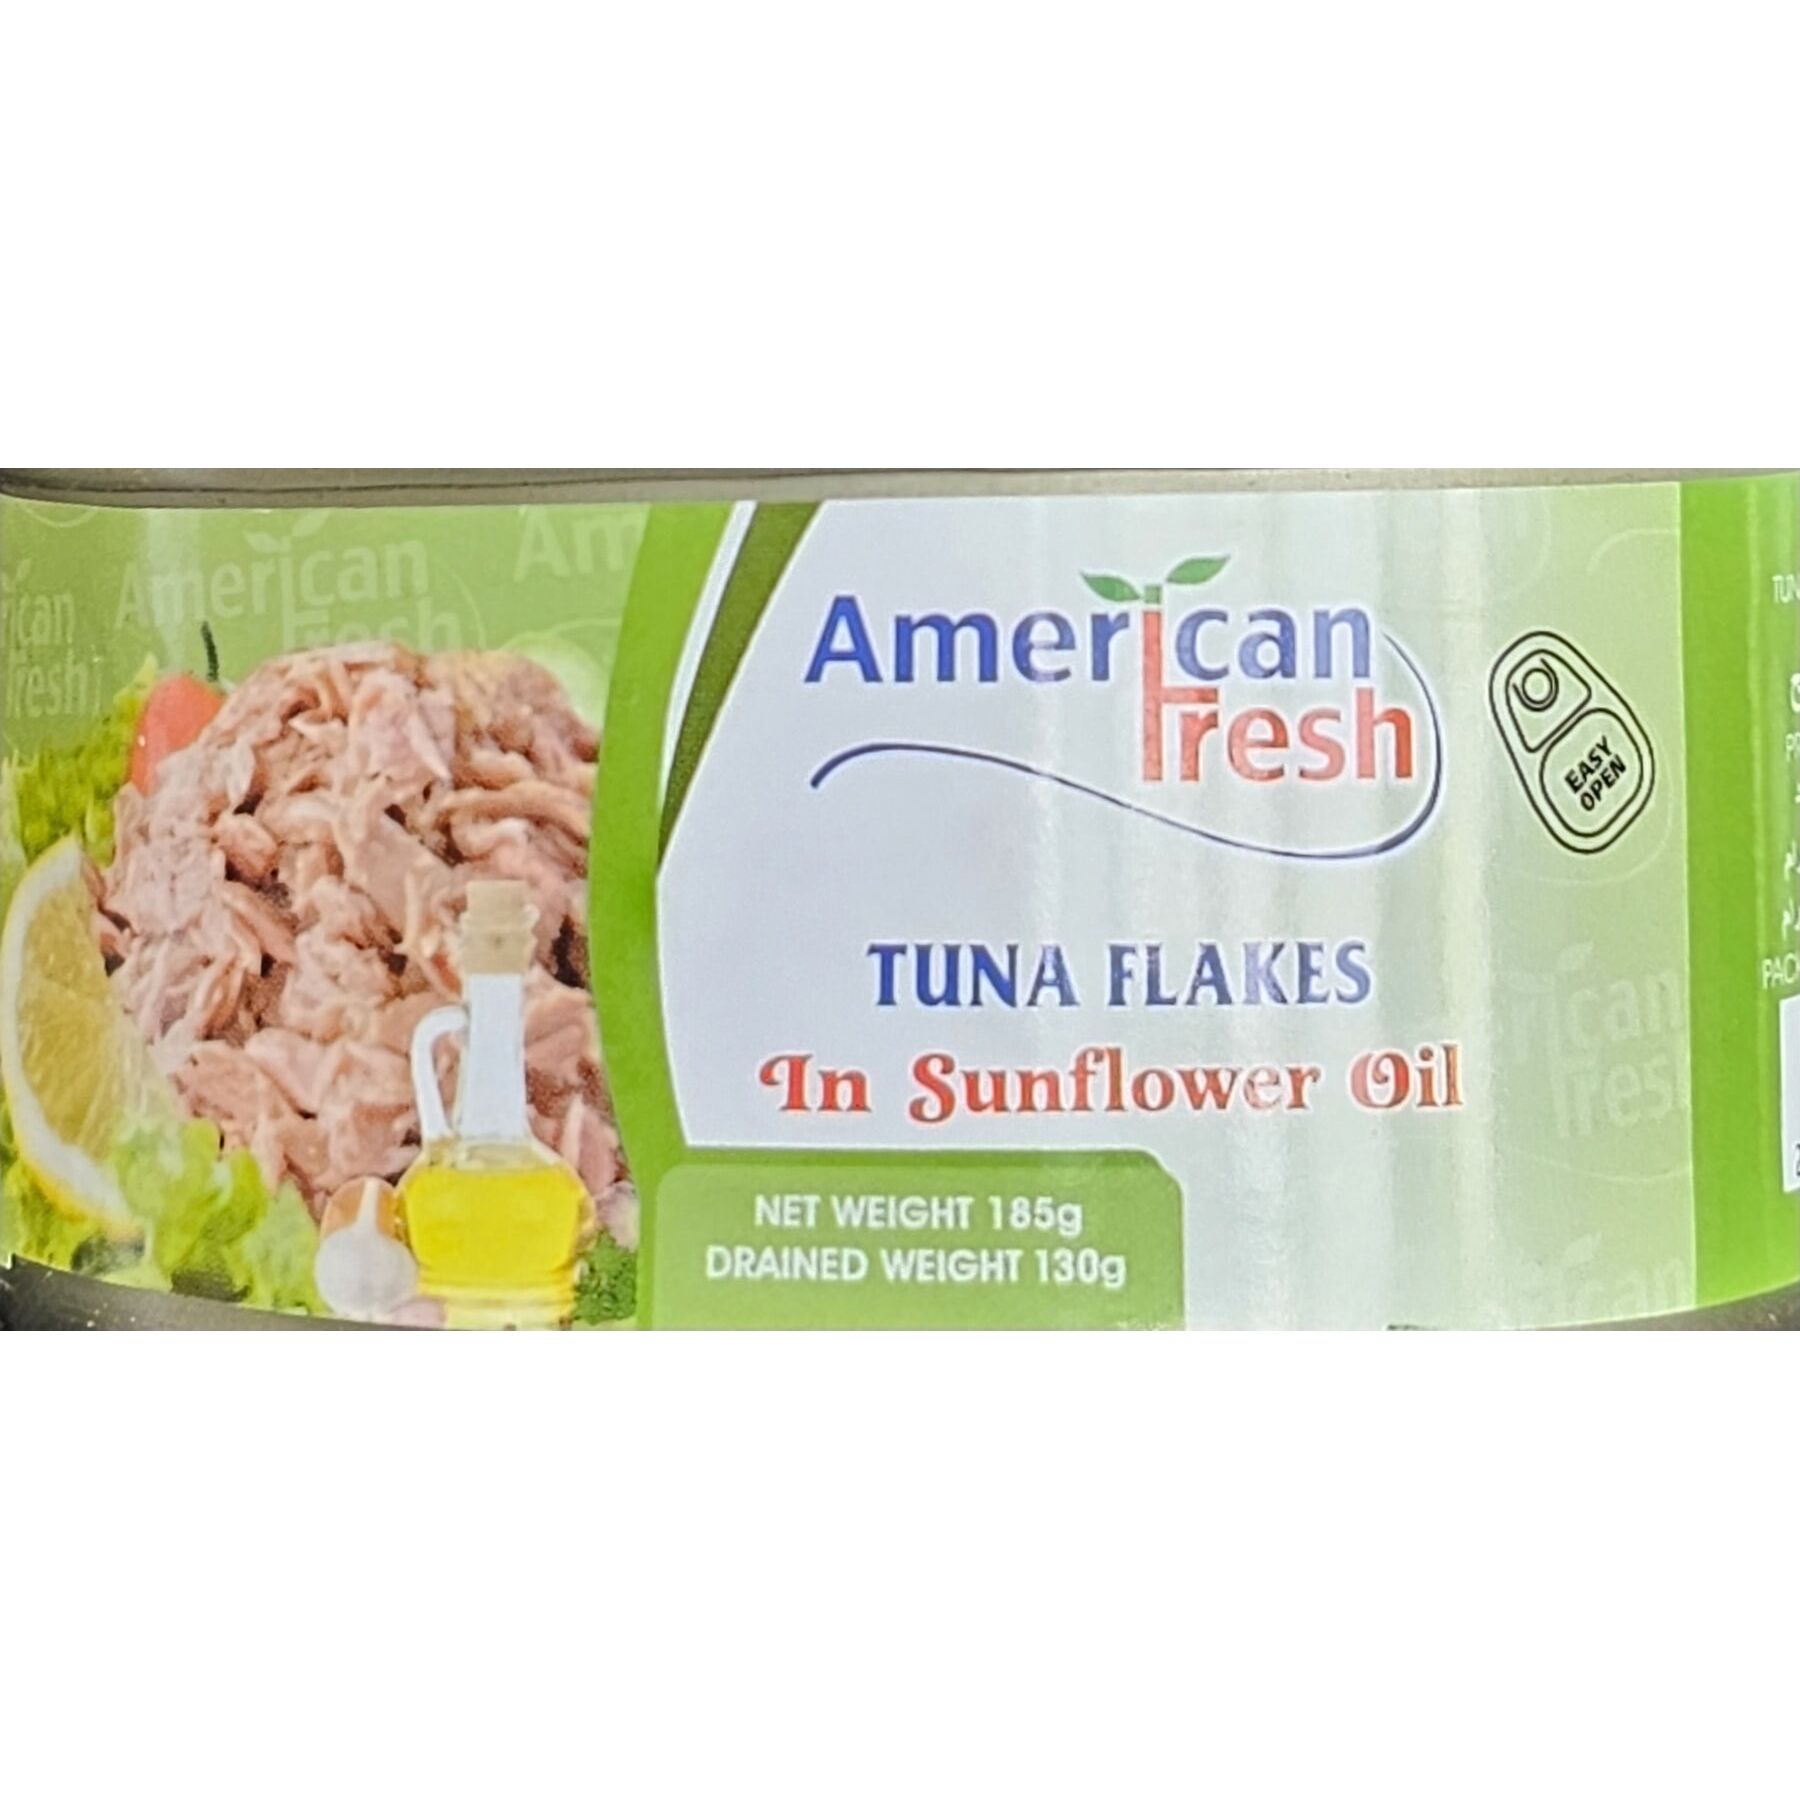 The Foods :: CANNED FOODS :: American Fresh Tuna Flakes Sunflower Oil- 185gm